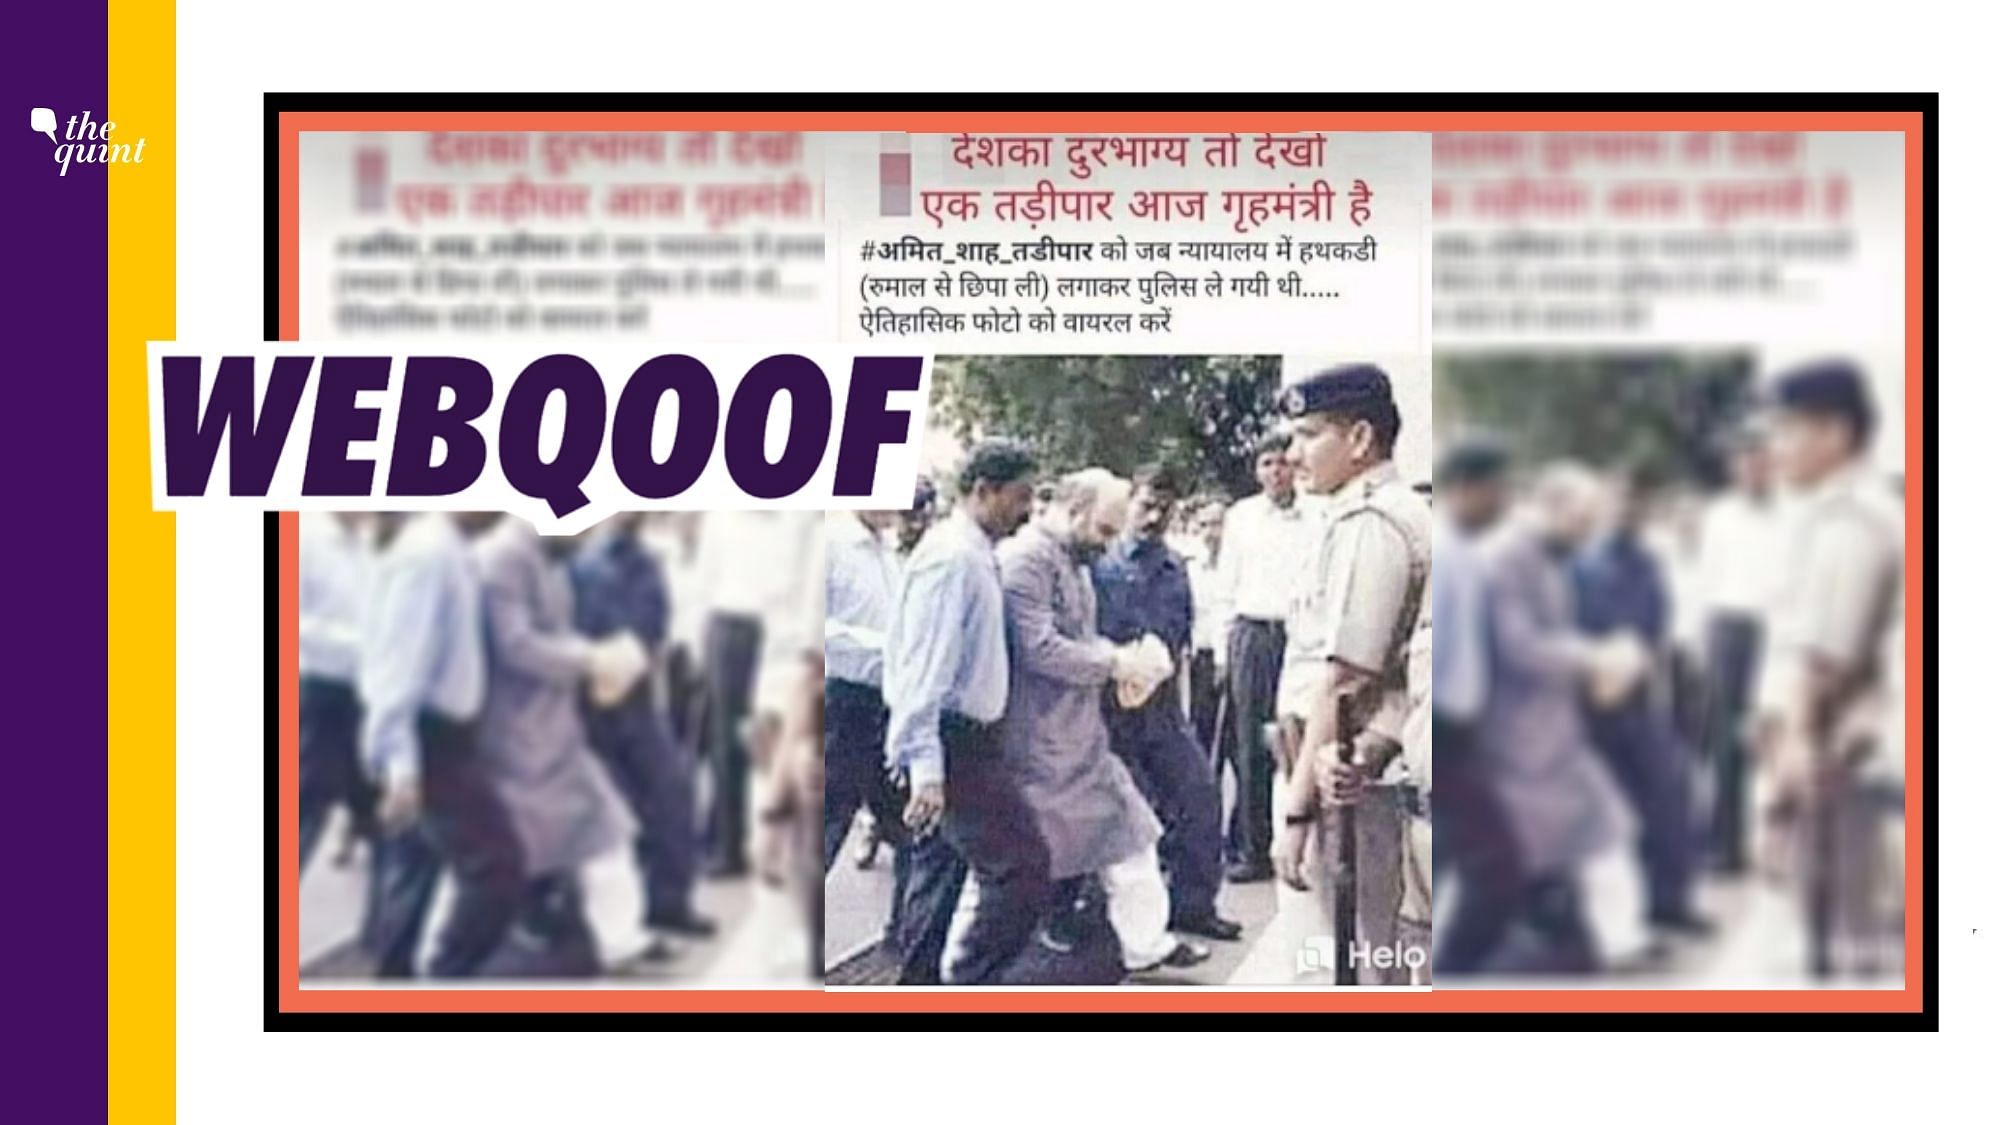 An image showing Home Minister Amit Shah with a few police personnel is viral with the false claim that he hid his handcuffs under a handkerchief while being taken to the court.